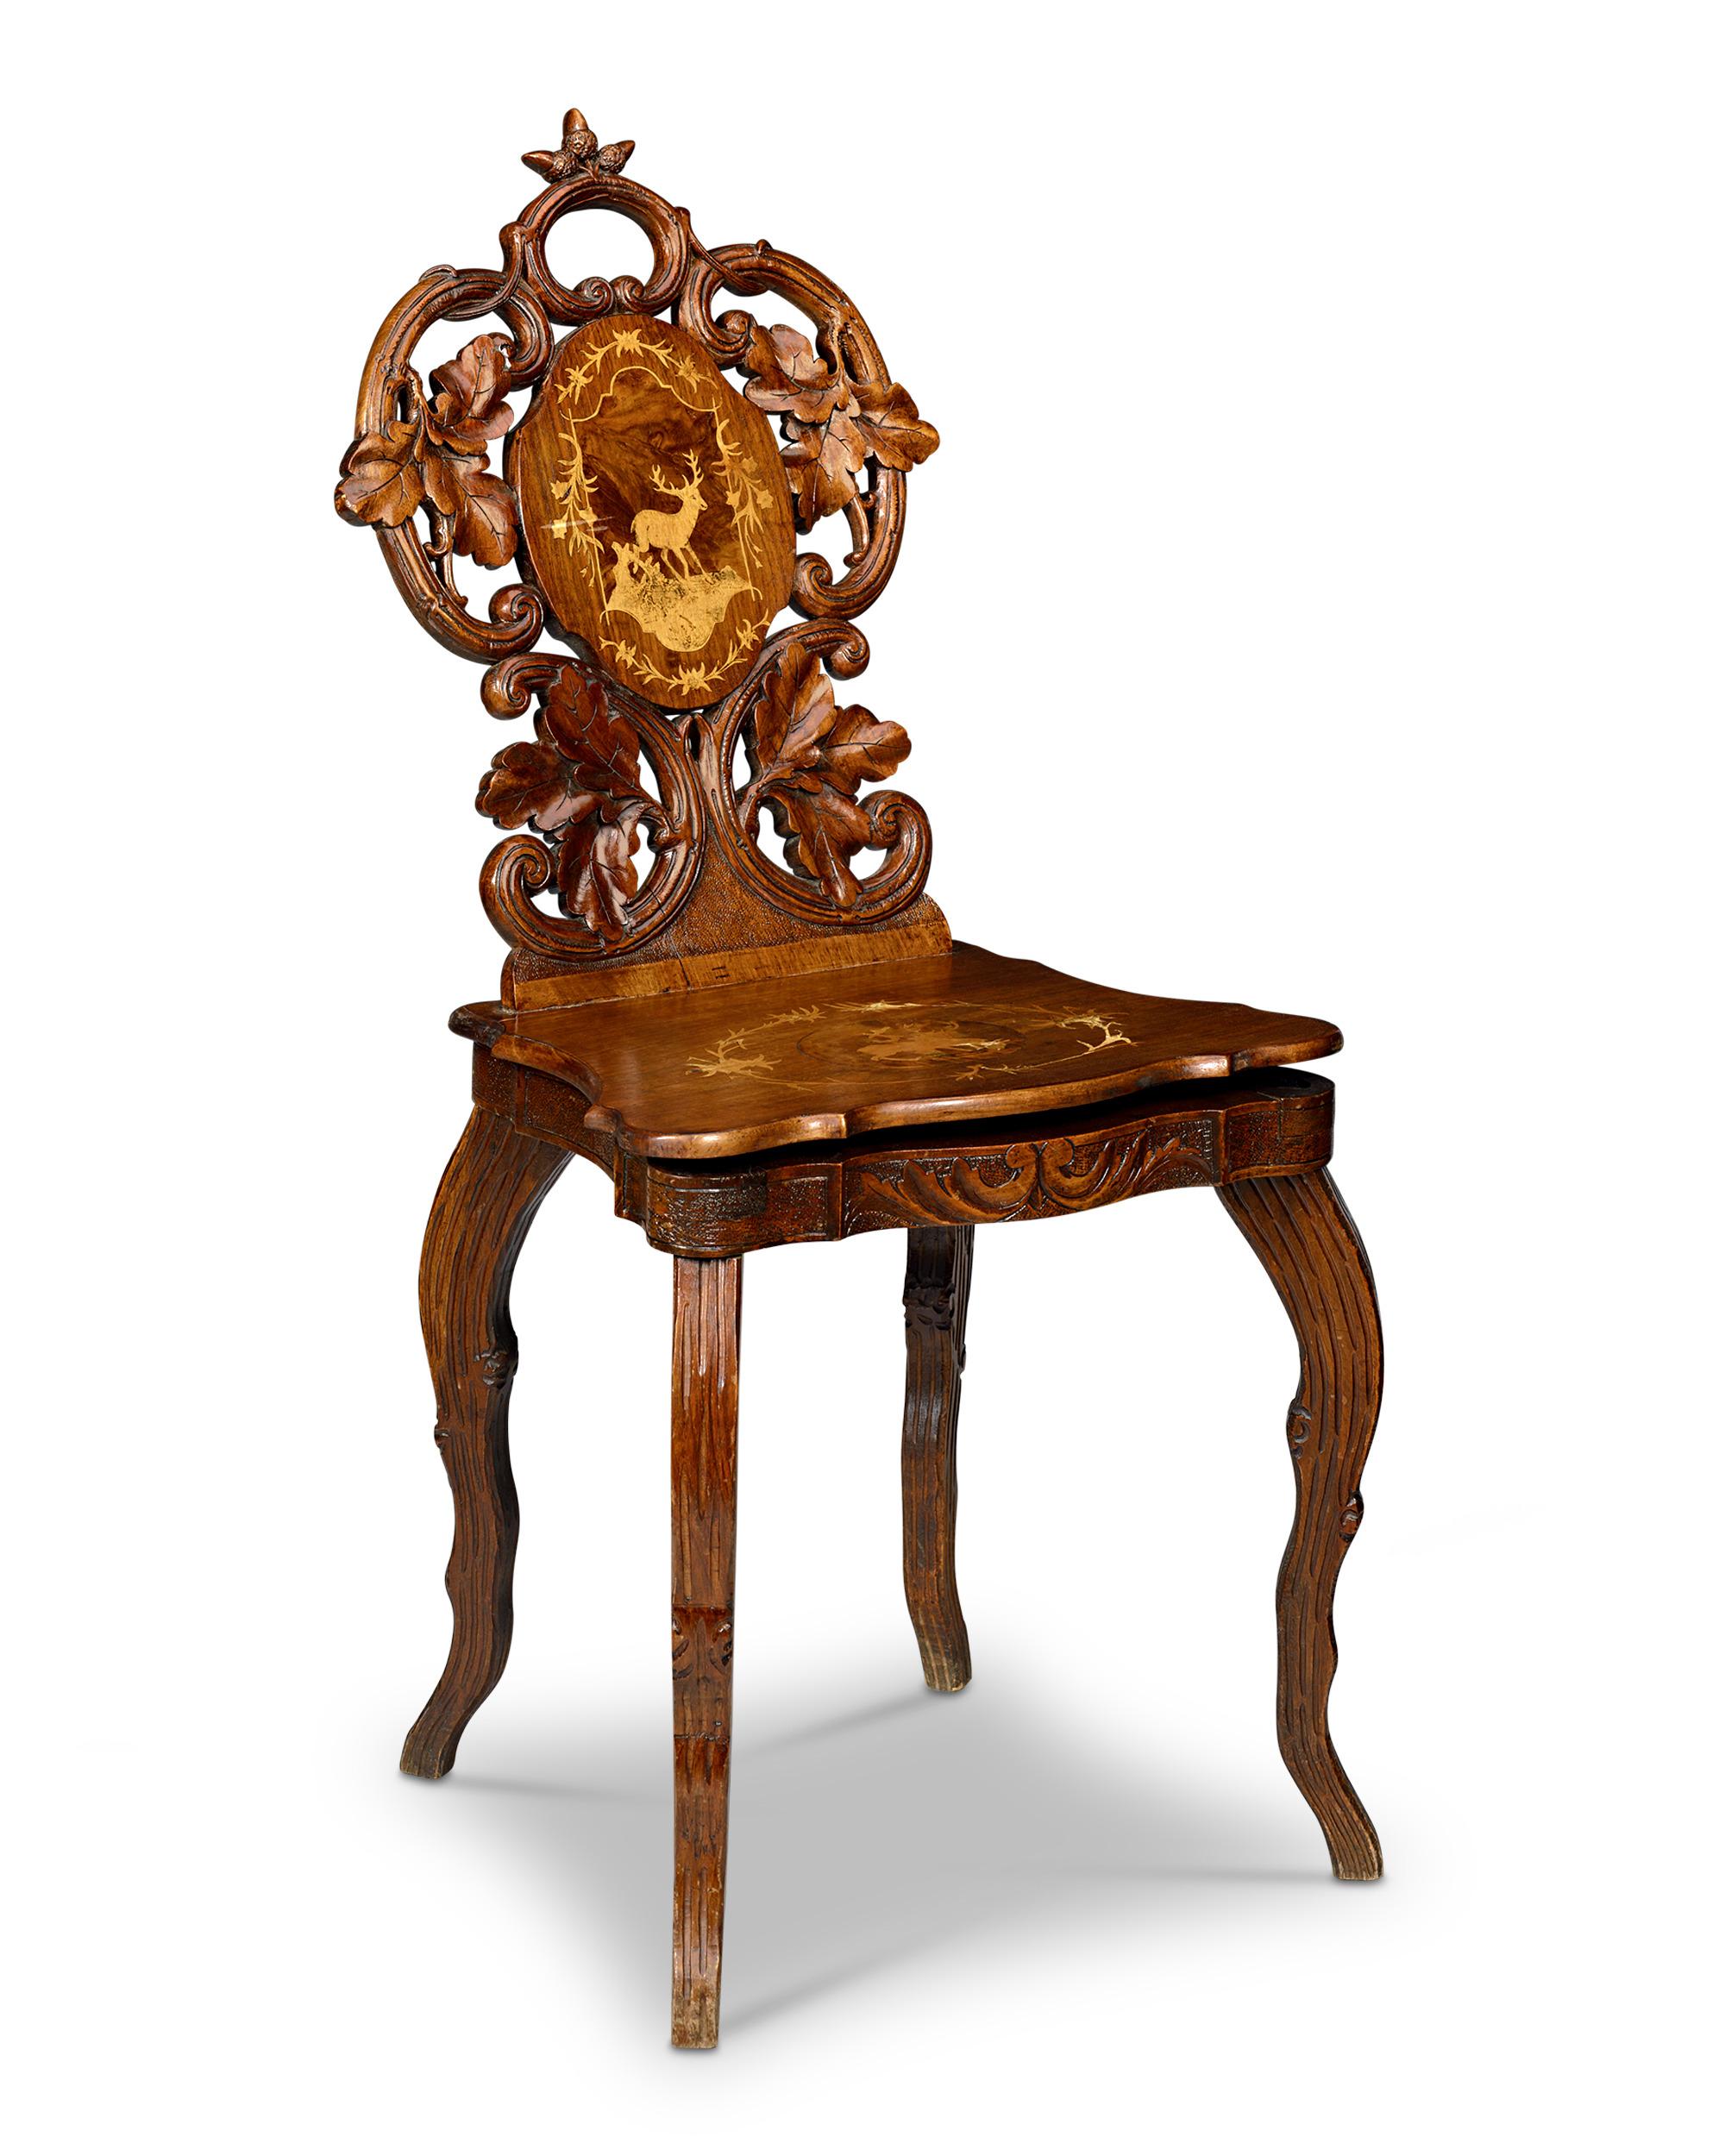 A music box hidden inside this beautifully carved Swiss chair will activate when the chair is sat upon. A remarkable example of the intricate craftsmanship and artistic innovation characteristic of late 19th-century Brienz, Switzerland, this chair